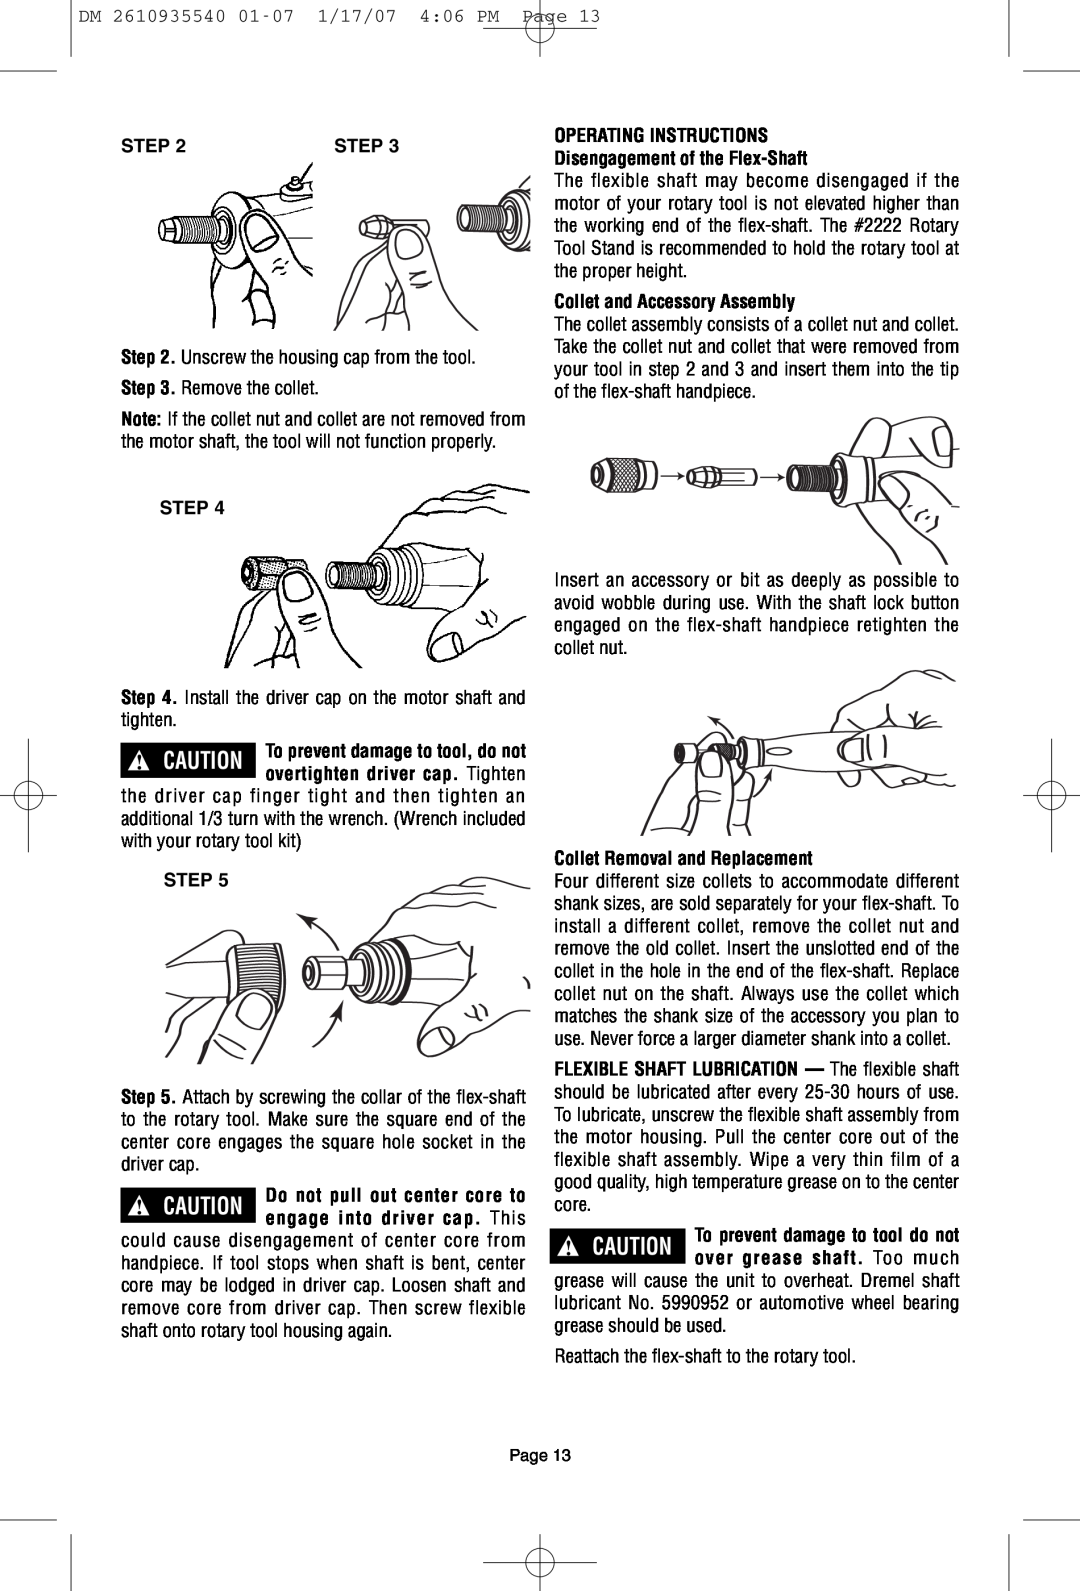 Dremel F013039519 OPERATING INSTRUCTIONS Disengagement of the Flex-Shaft, Collet and Accessory Assembly, much, Step 